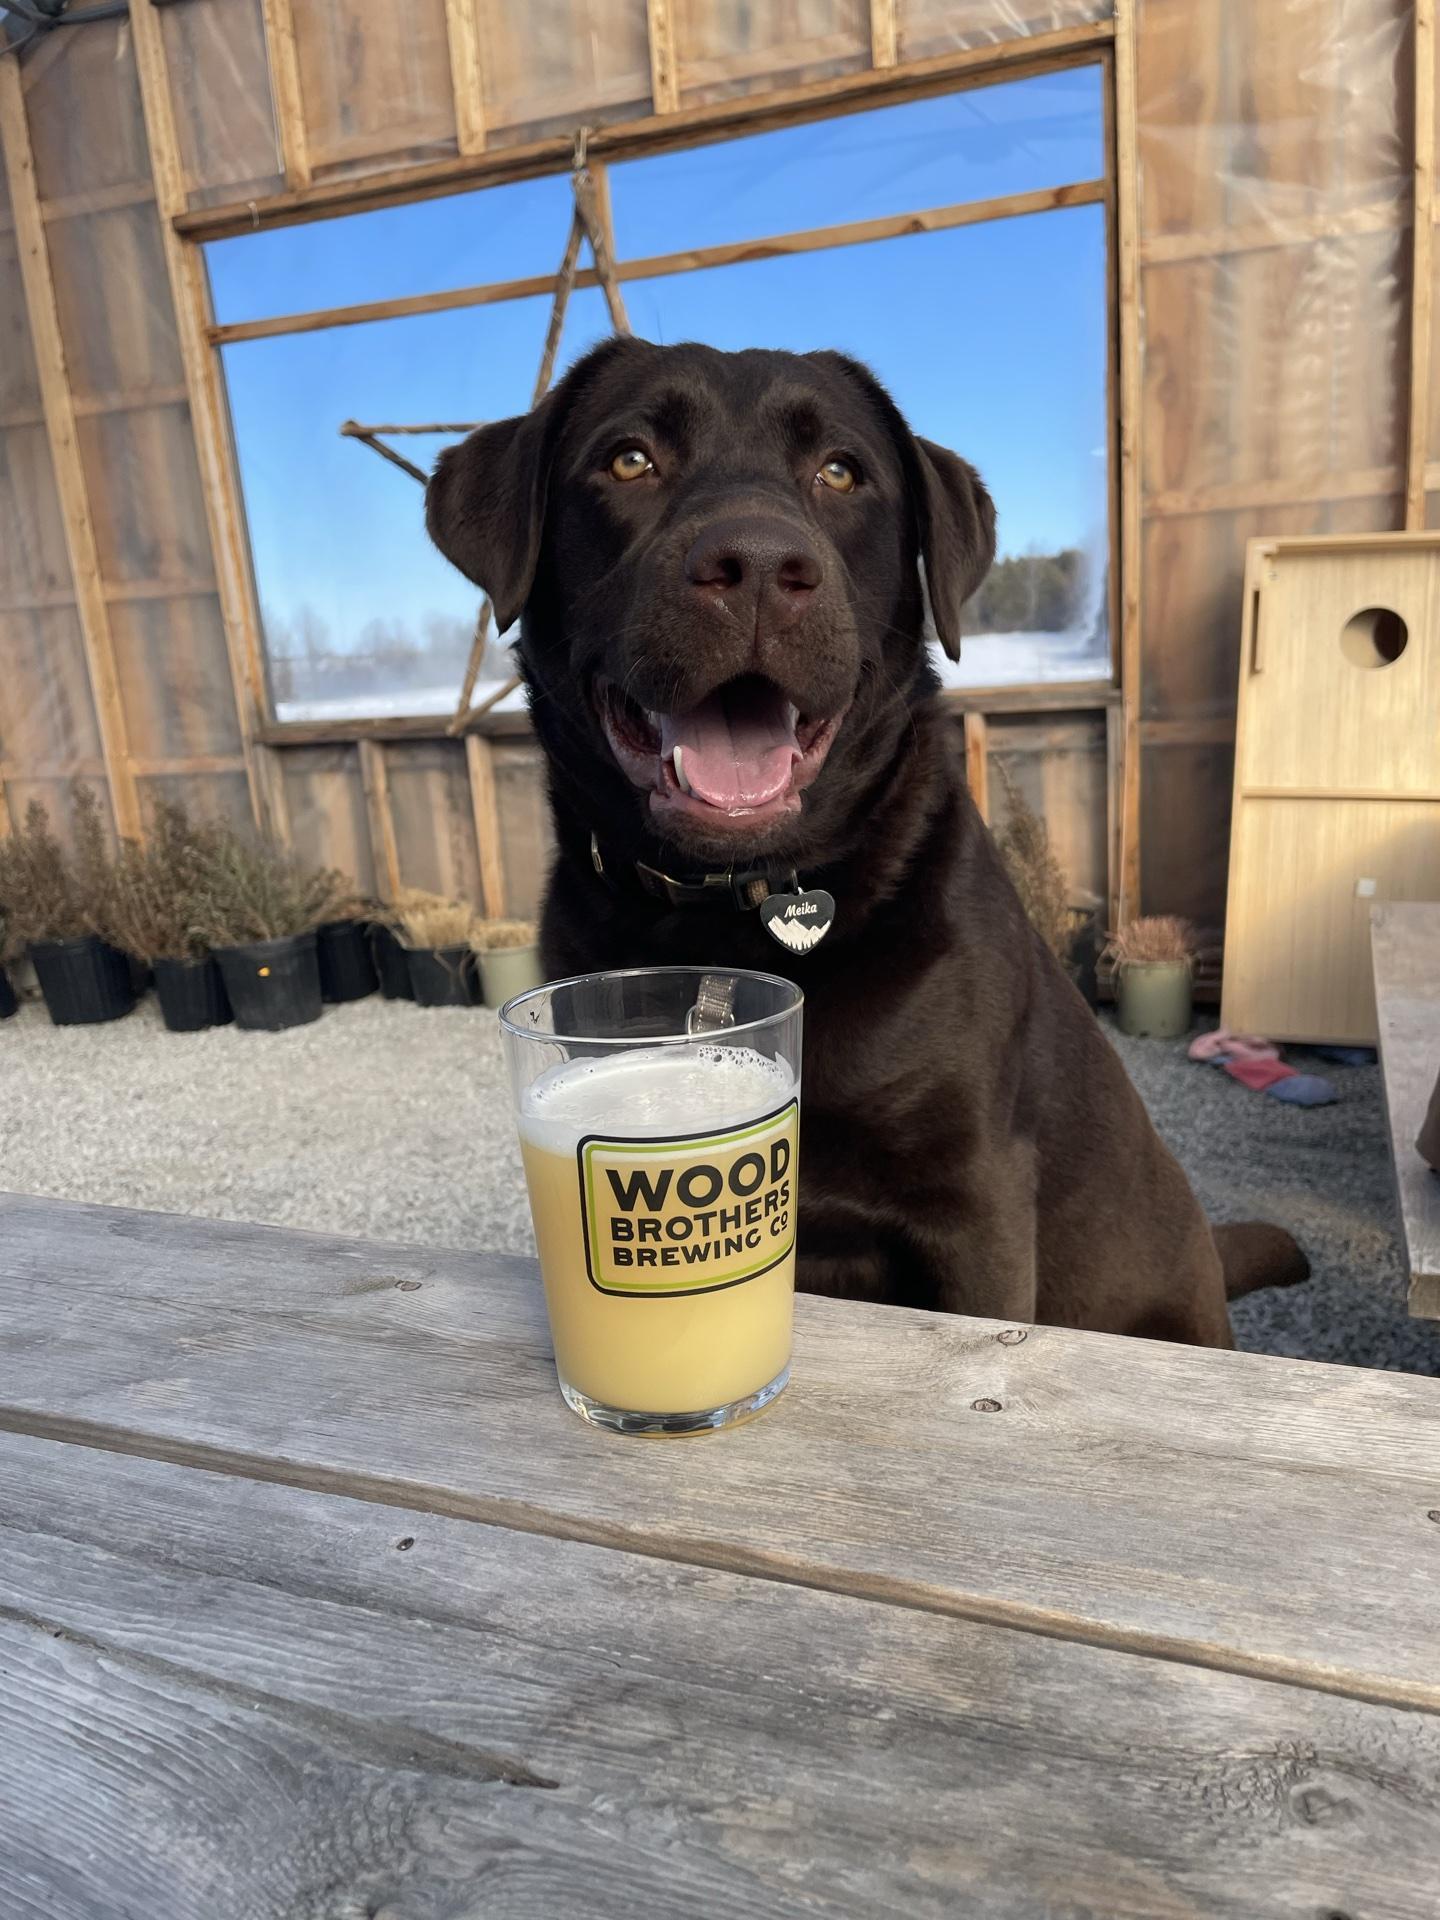 Pet Friendly Wood Brothers Brewing Company